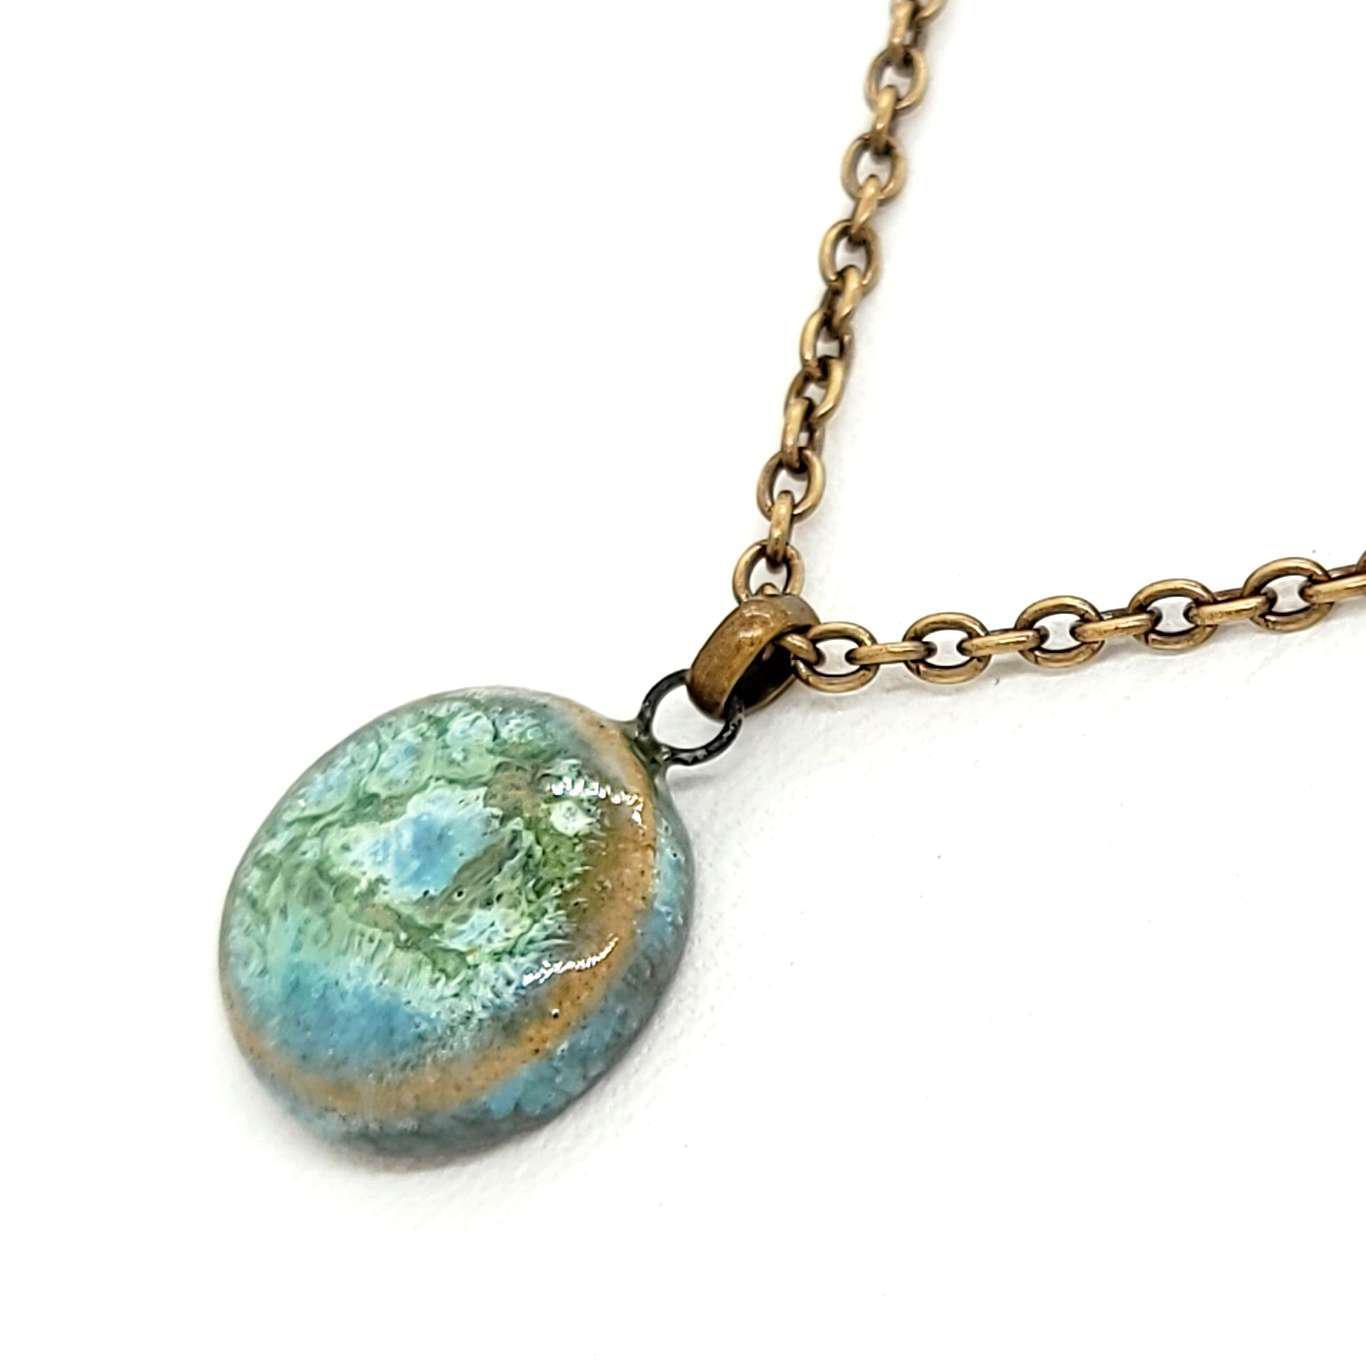 Necklace - Mini Circle in Mystic by Dandy Jewelry